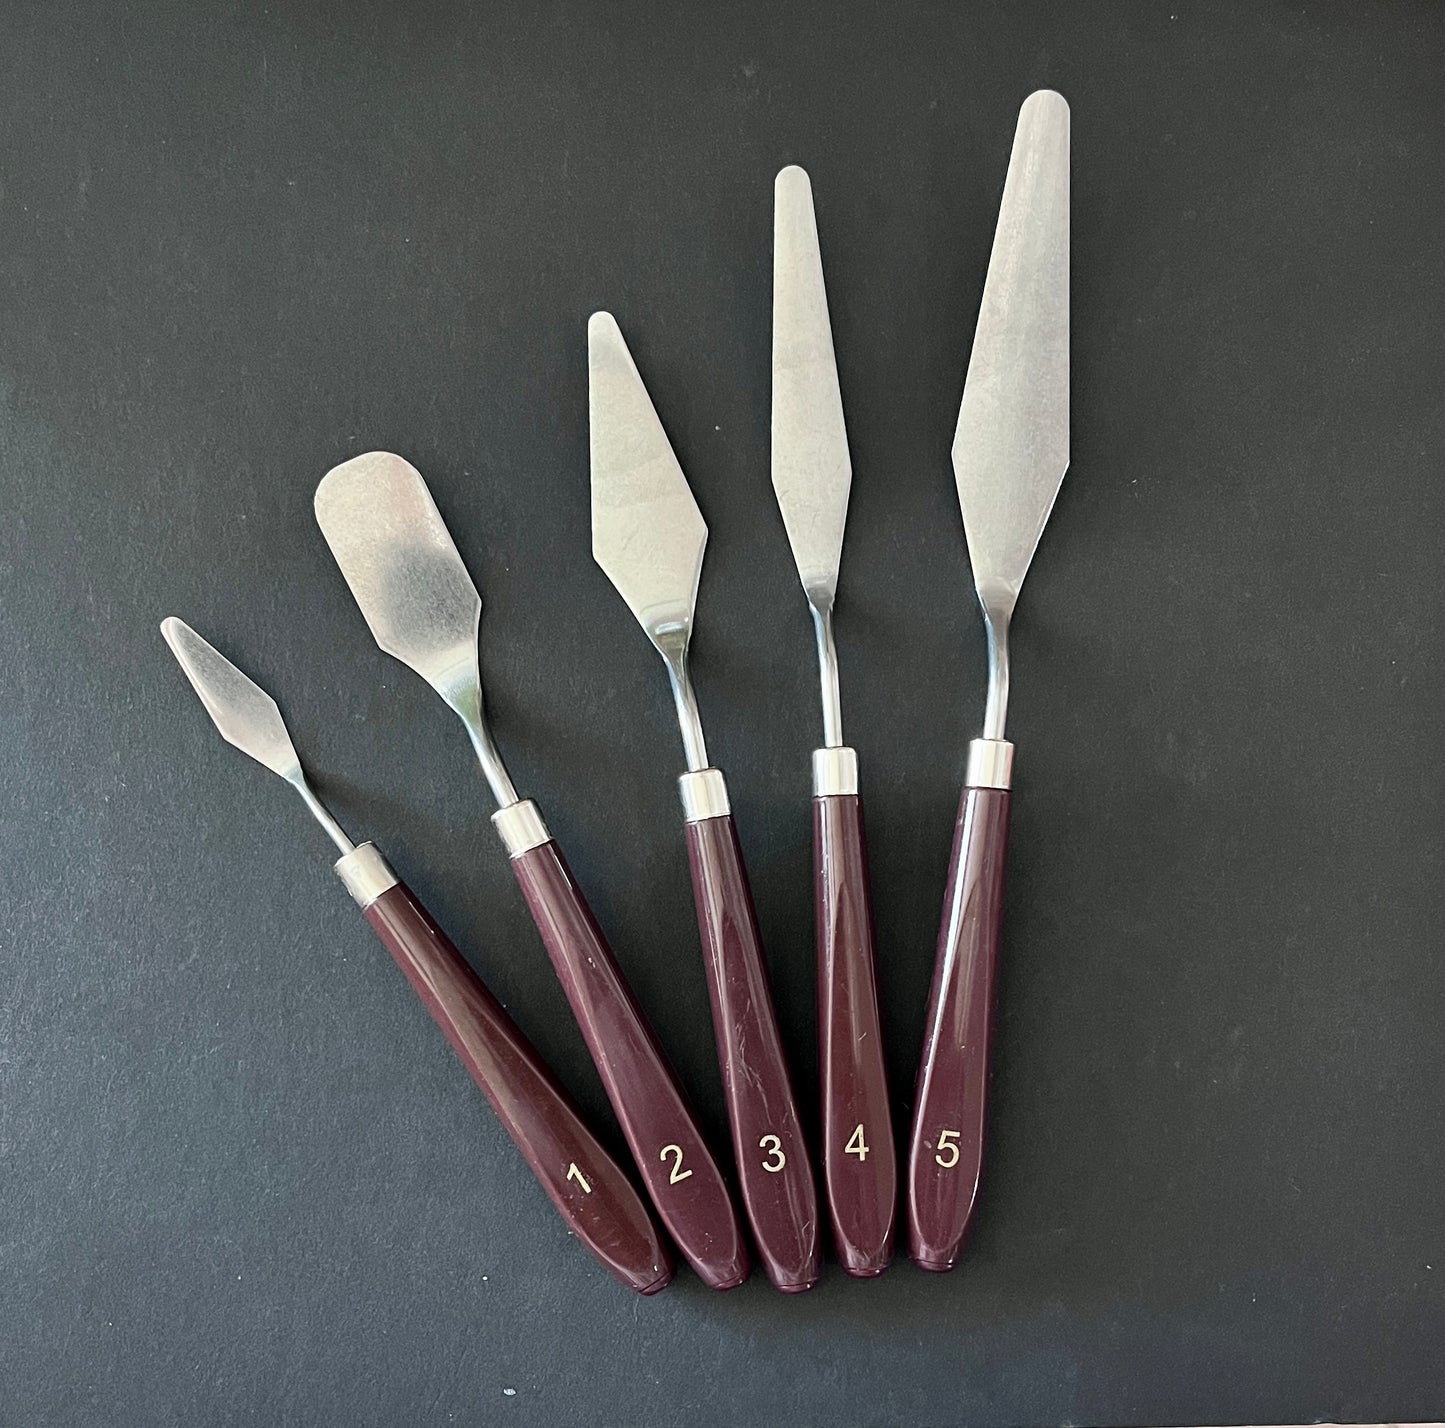 Stainless Steel Palette Knife 5-pc set